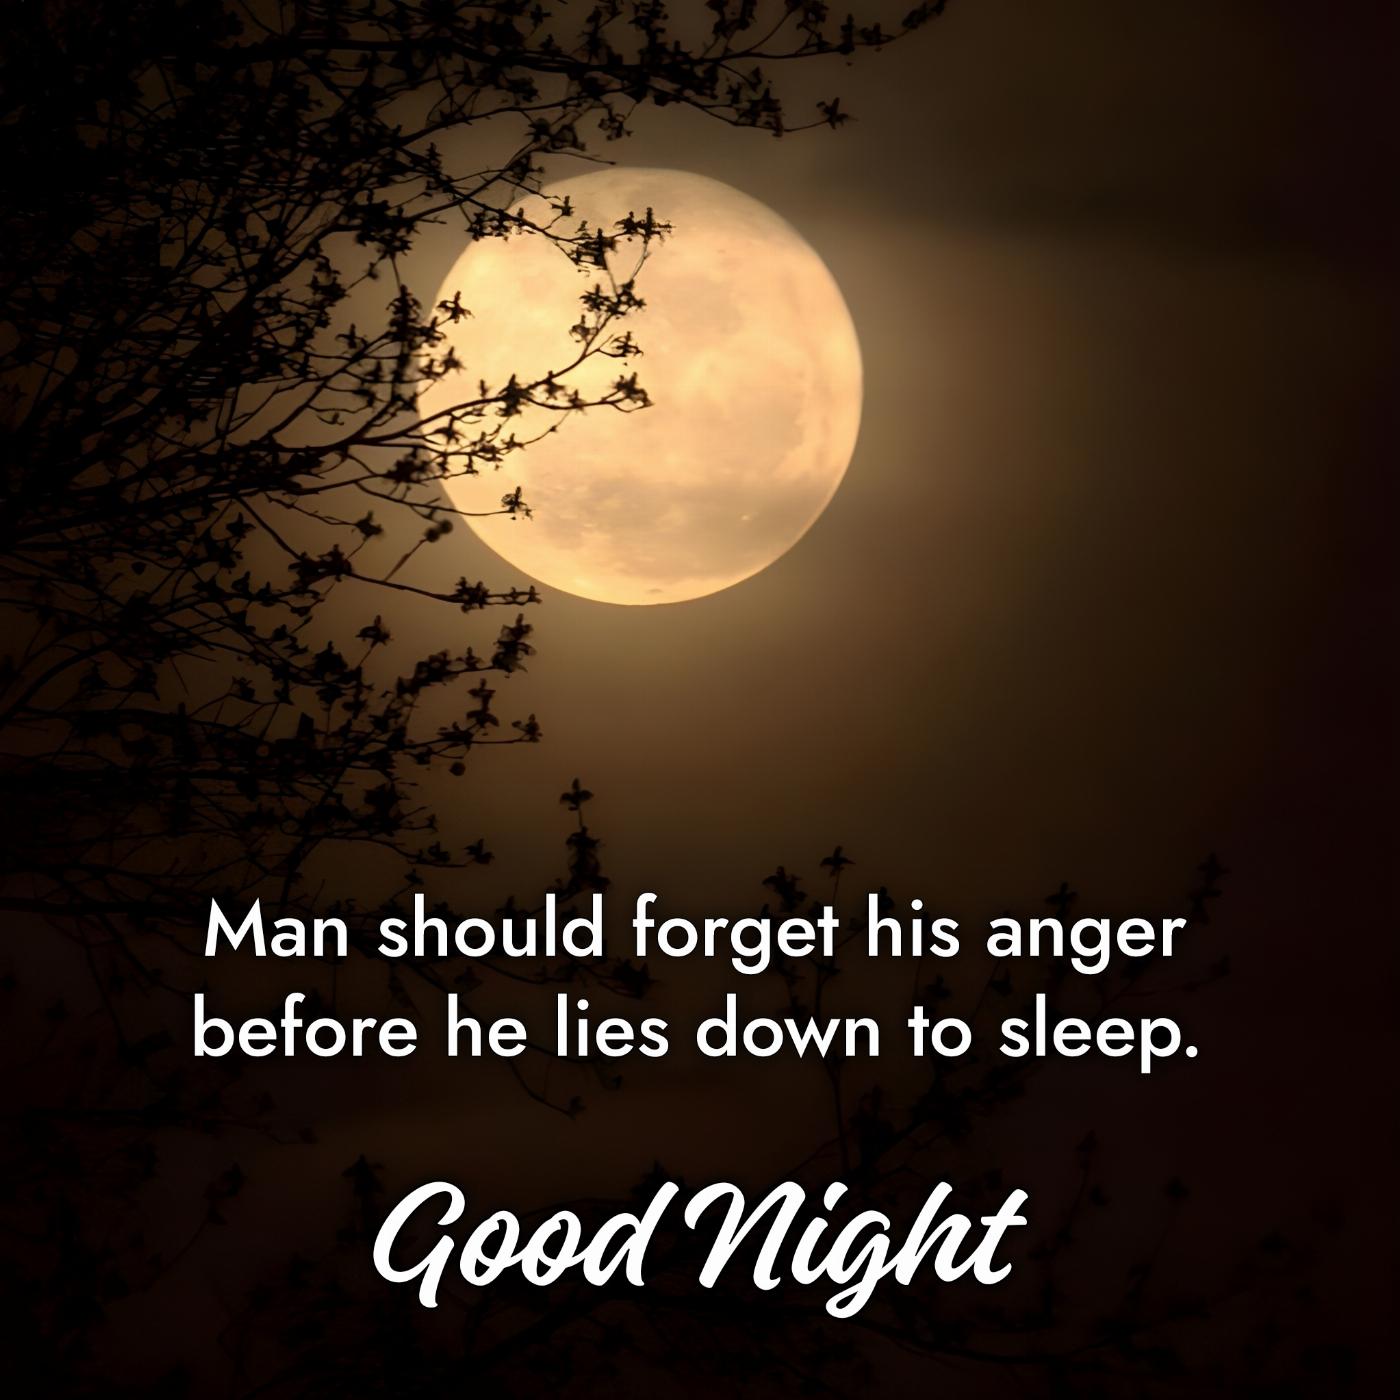 Man should forget his anger before he lies down